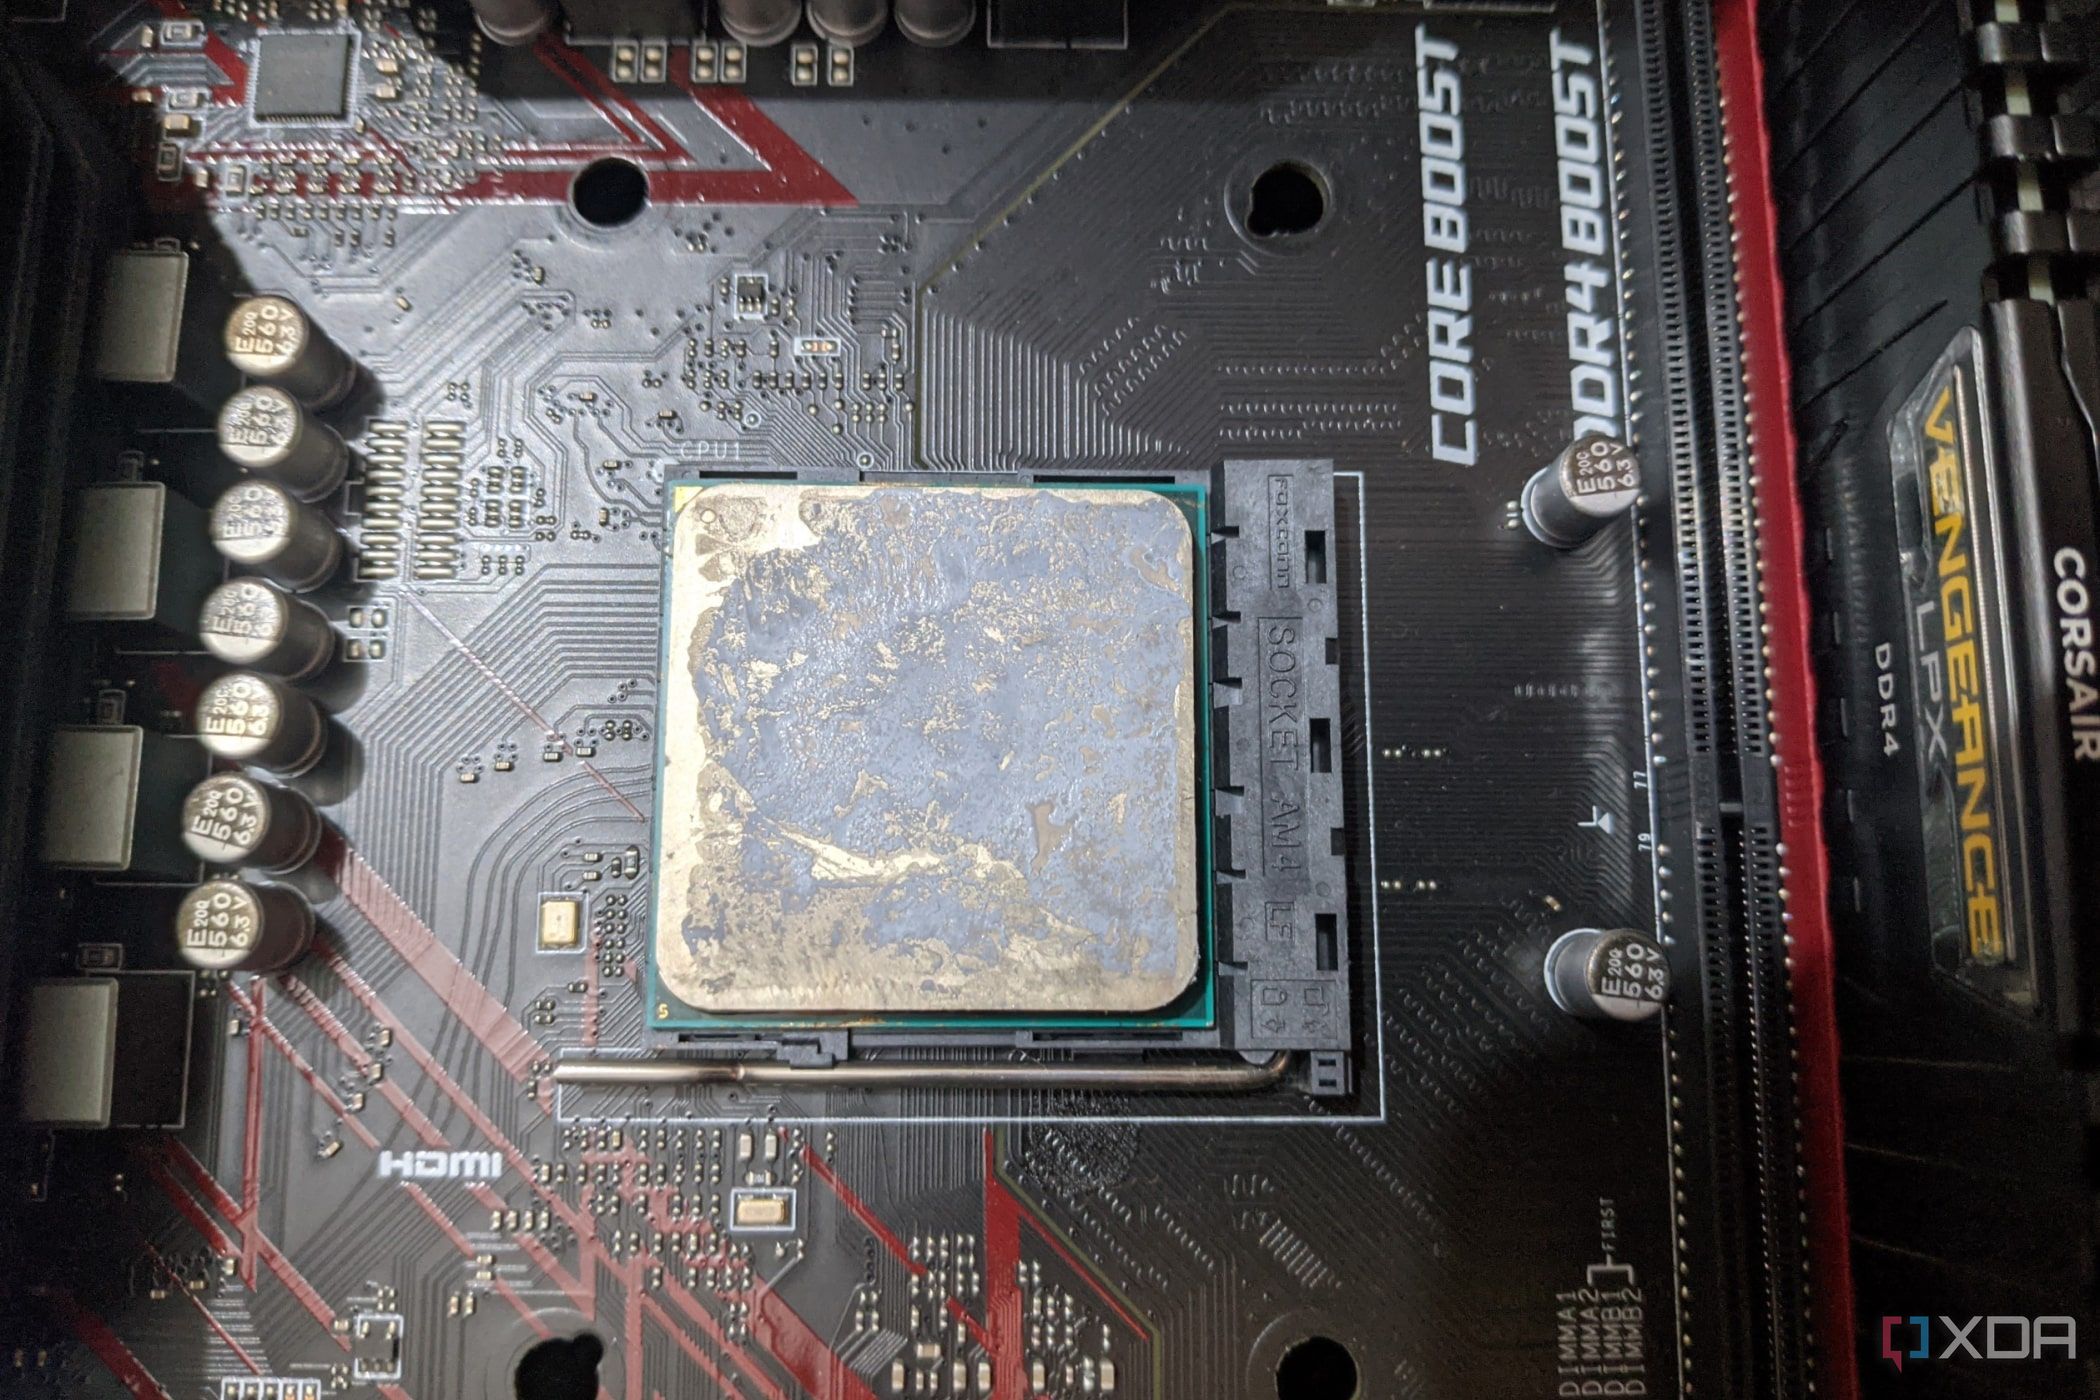 An image of the AMD Ryzen 1600 with thermal paste smeared all over it